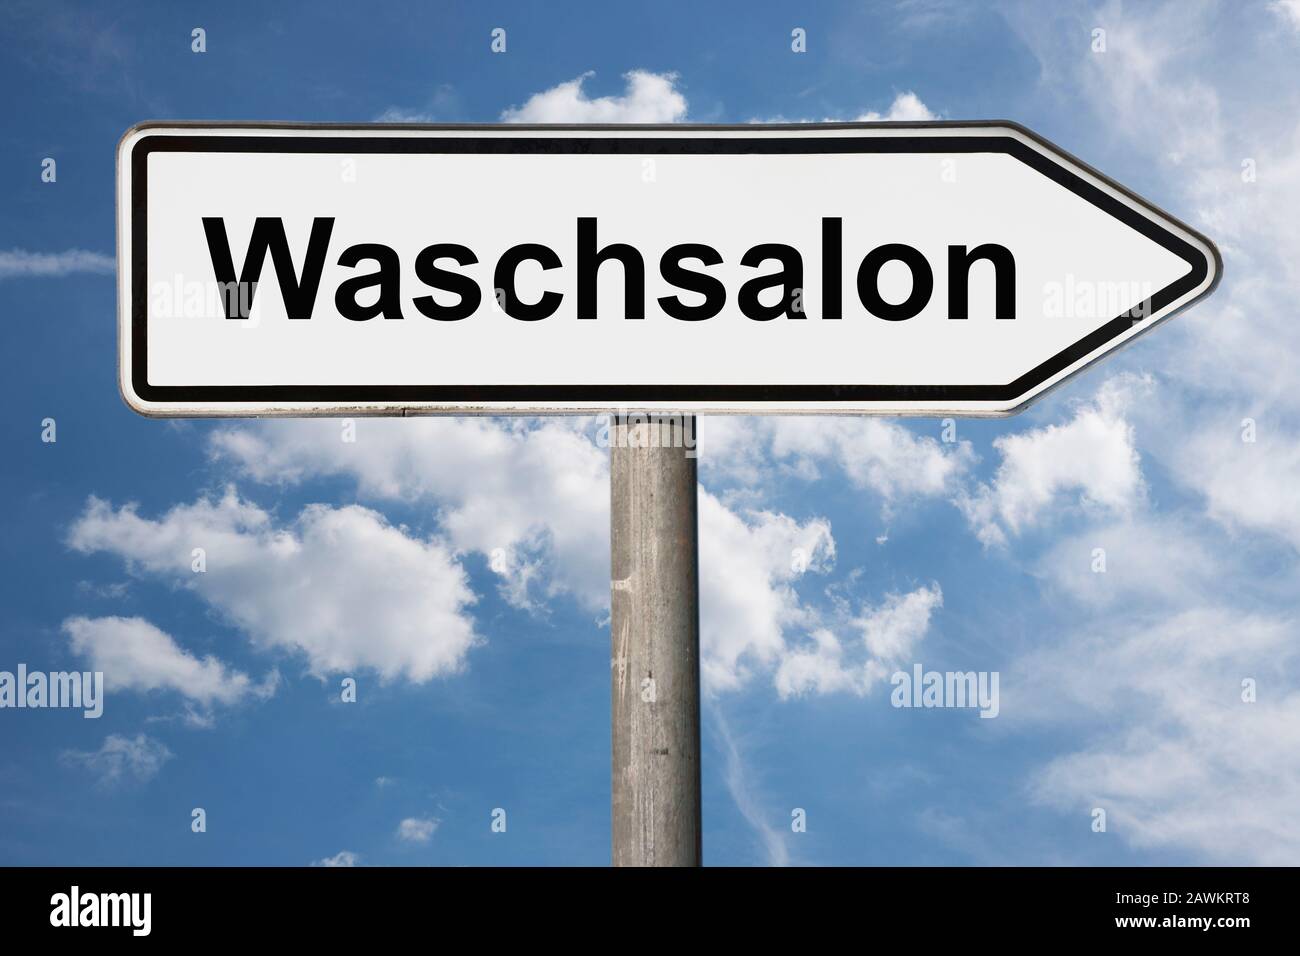 Detail photo of a signpost with the inscription Waschsalon (Laundromat) Stock Photo